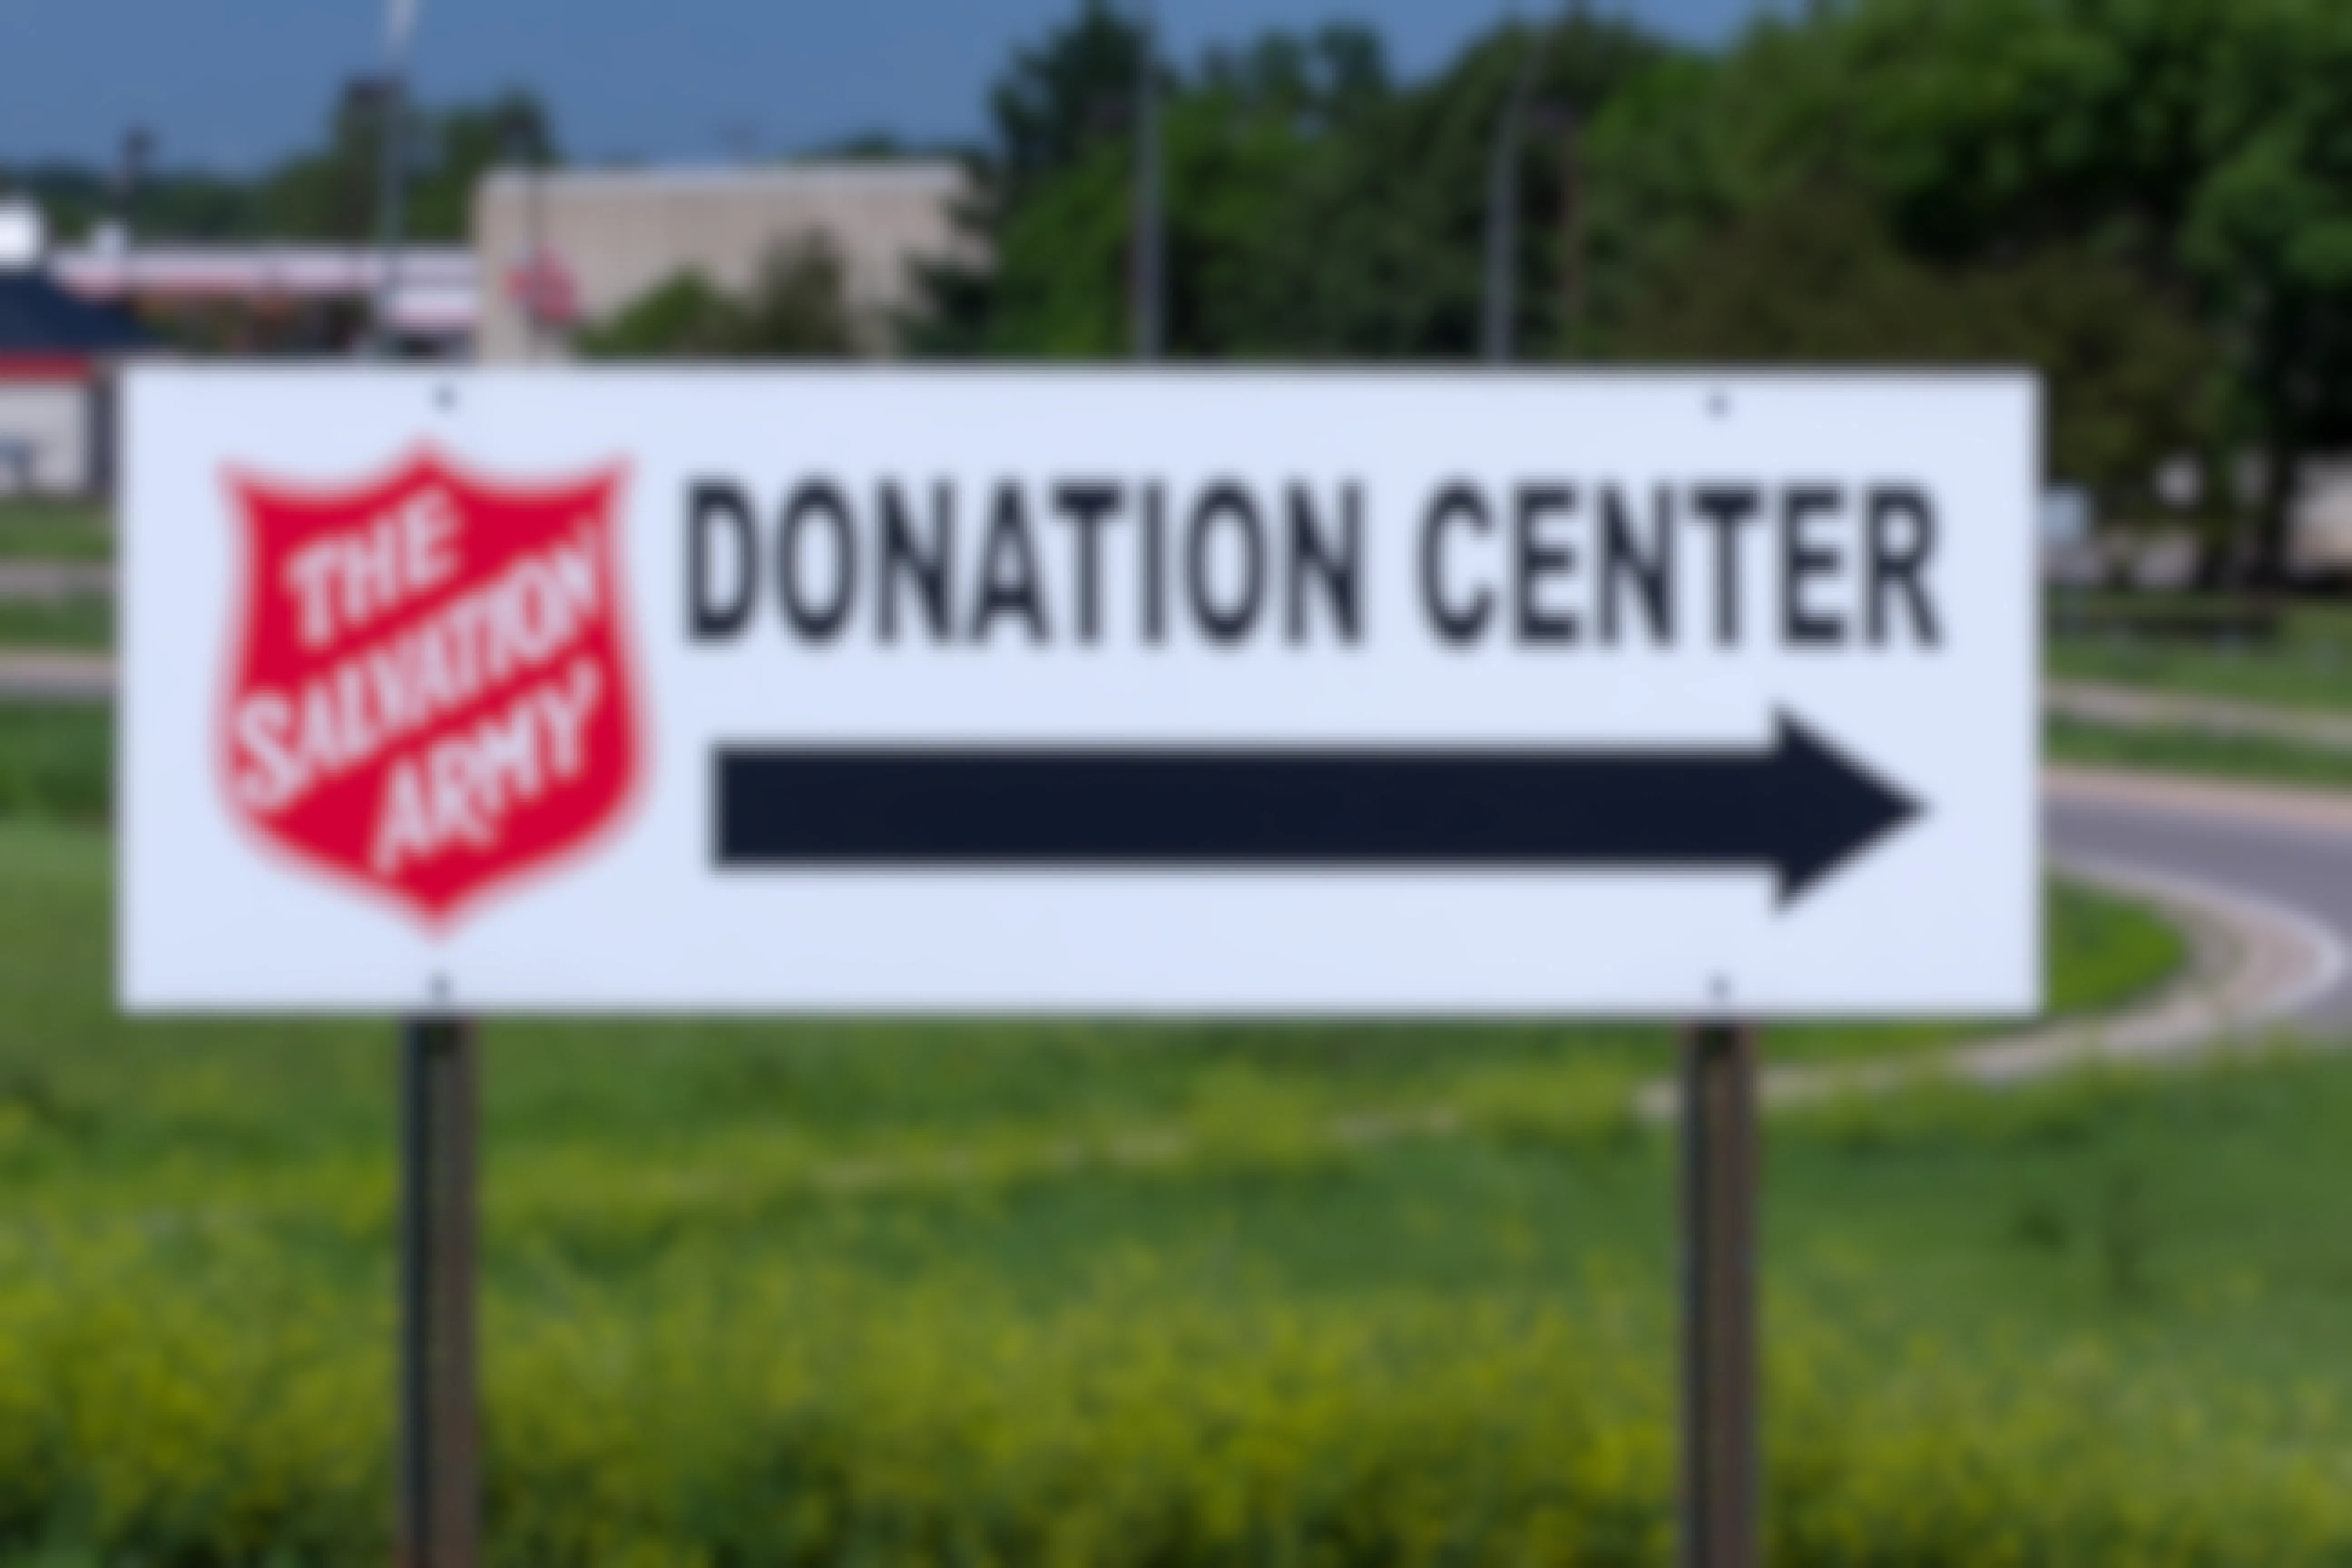 The Salvation Army Donation Center sign with a large black arrow pointing to the right.